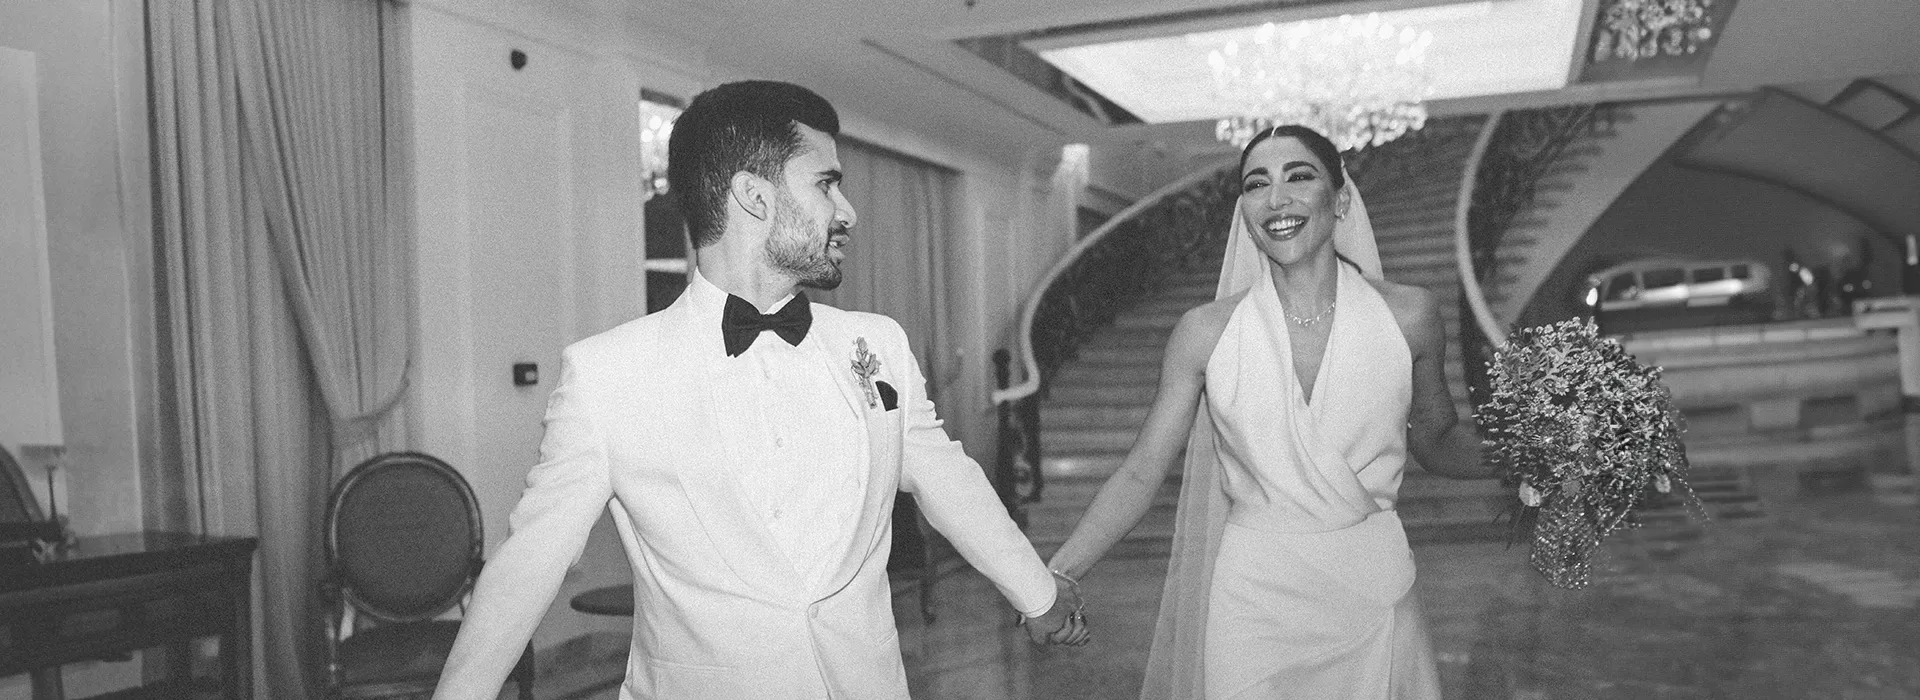 Black and white photo of smiling groom and bride wearing wedding dress  in a grand room.